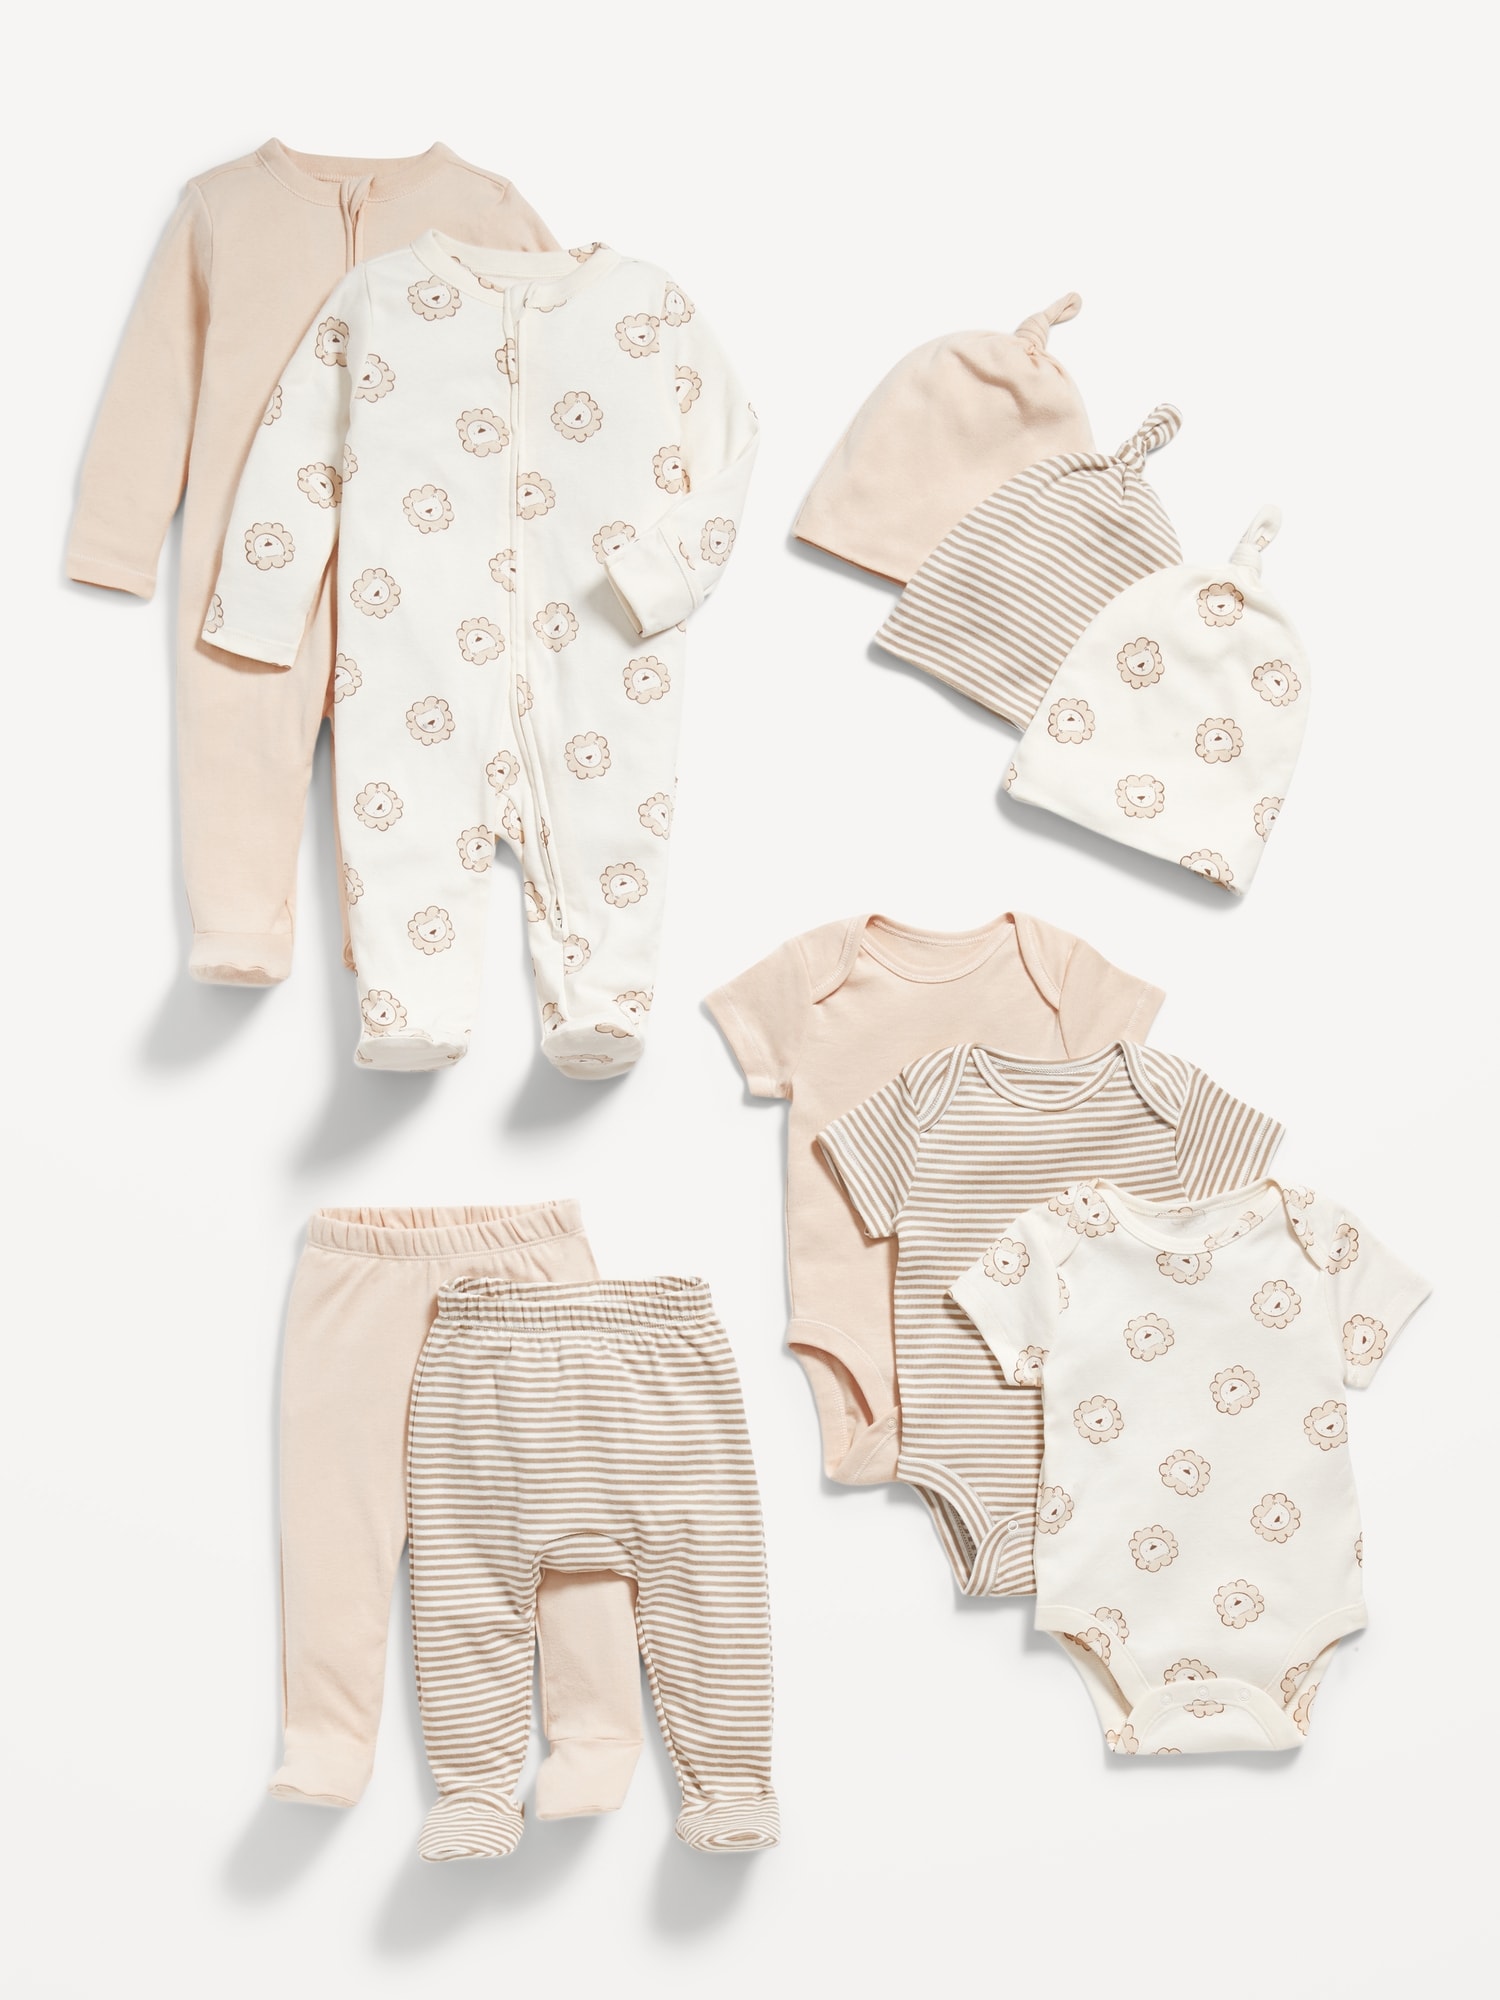 Unisex 10-Piece Layette Set for Baby Hot Deal